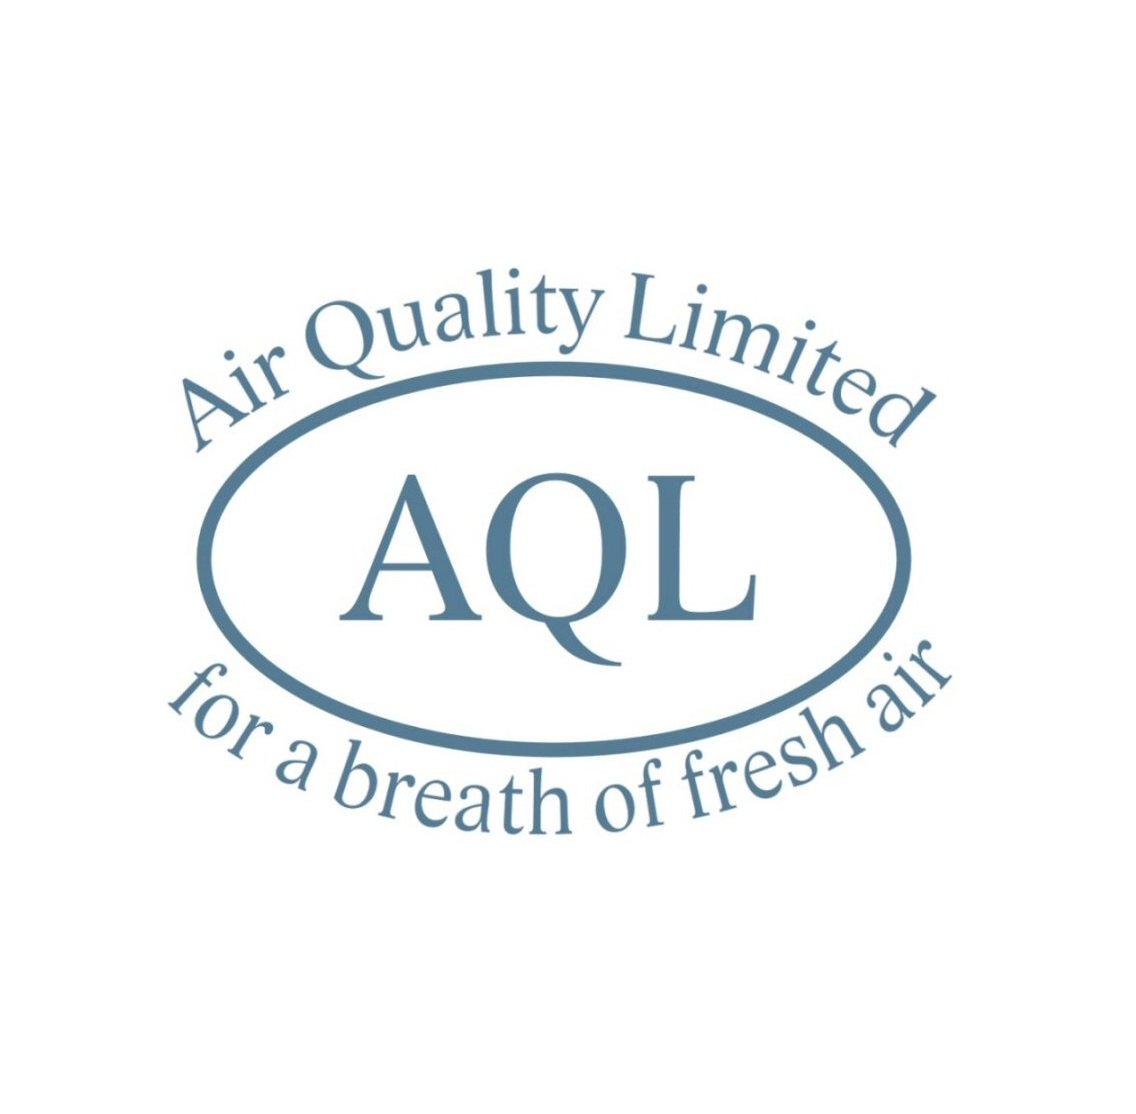 Welcome to Air Quality Limited – a company that specialises in the on-site #Testing of #BreathingAir and #EnvironmentalAir